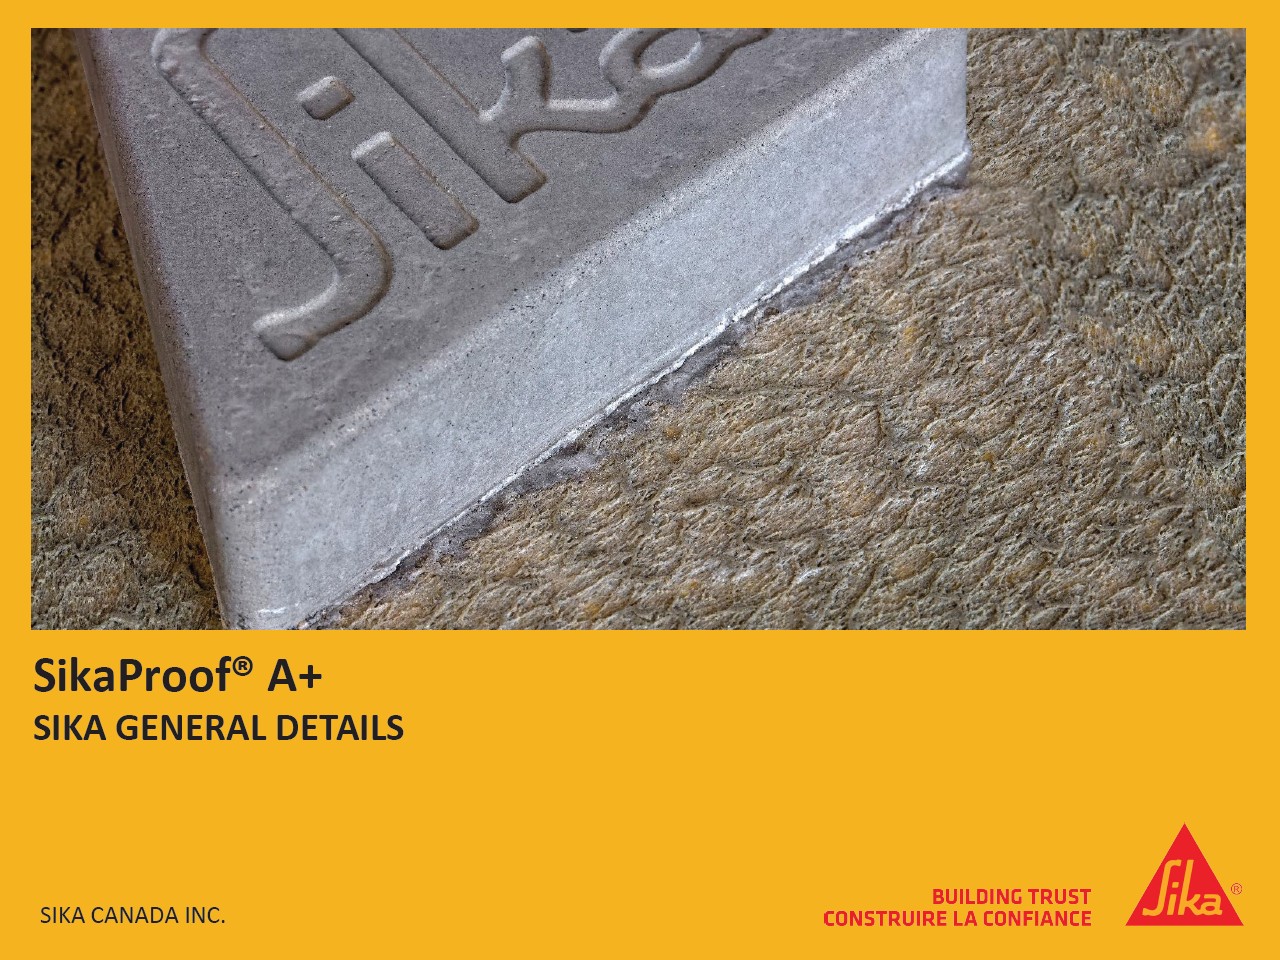 SikaProof® A plus - Sika General Details